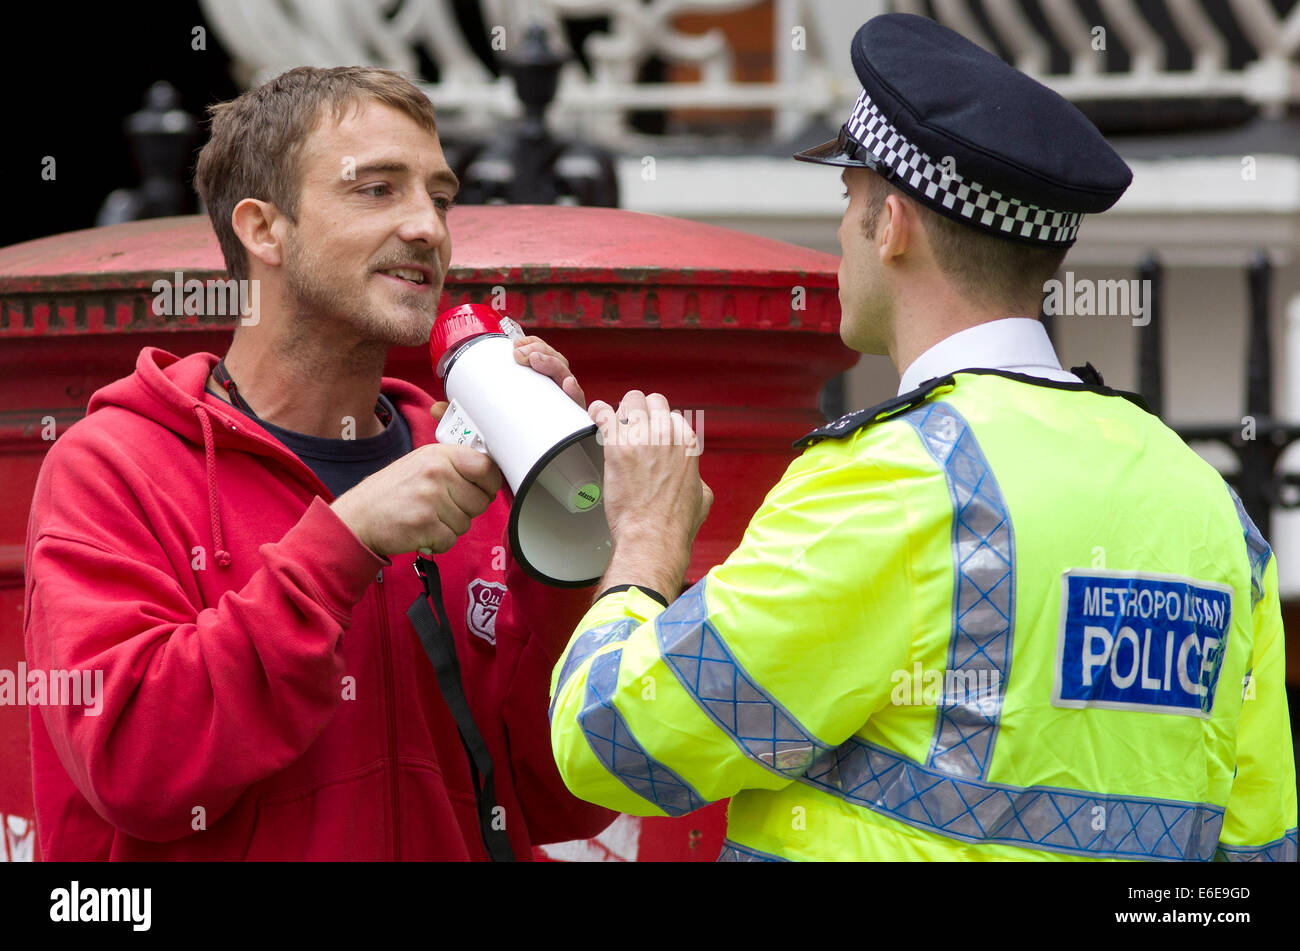 UK, London :  A police officer remonstrates with a protester on a street during a demonstration in London. 18.08.2014 Stock Photo